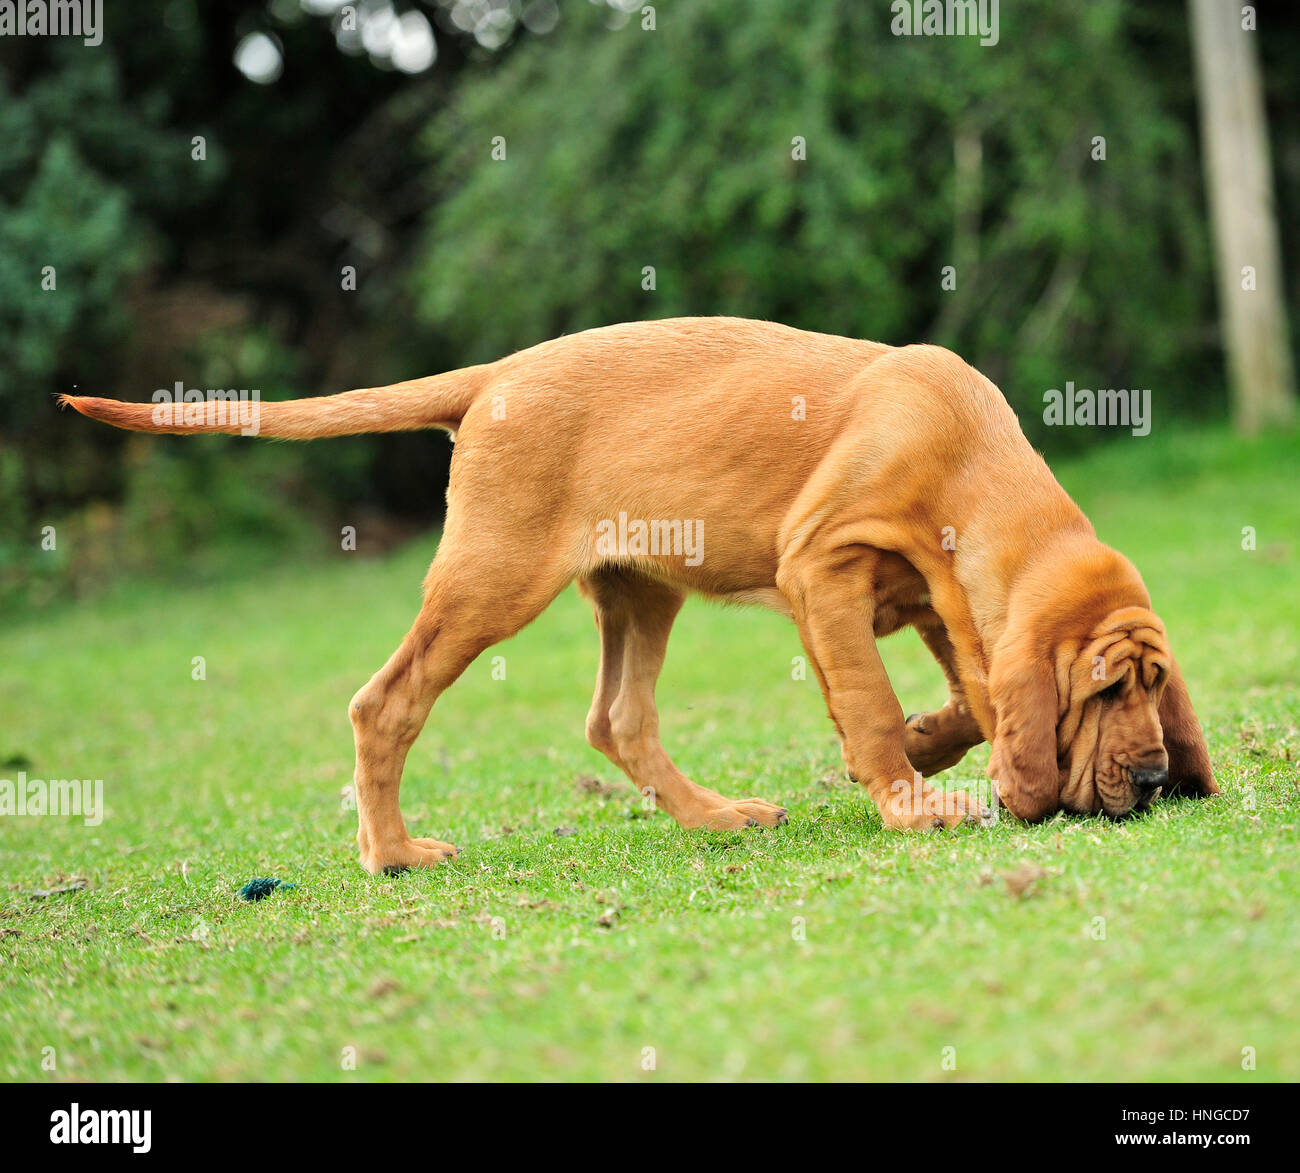 bloodhound-following-a-scent-HNGCD7.jpg